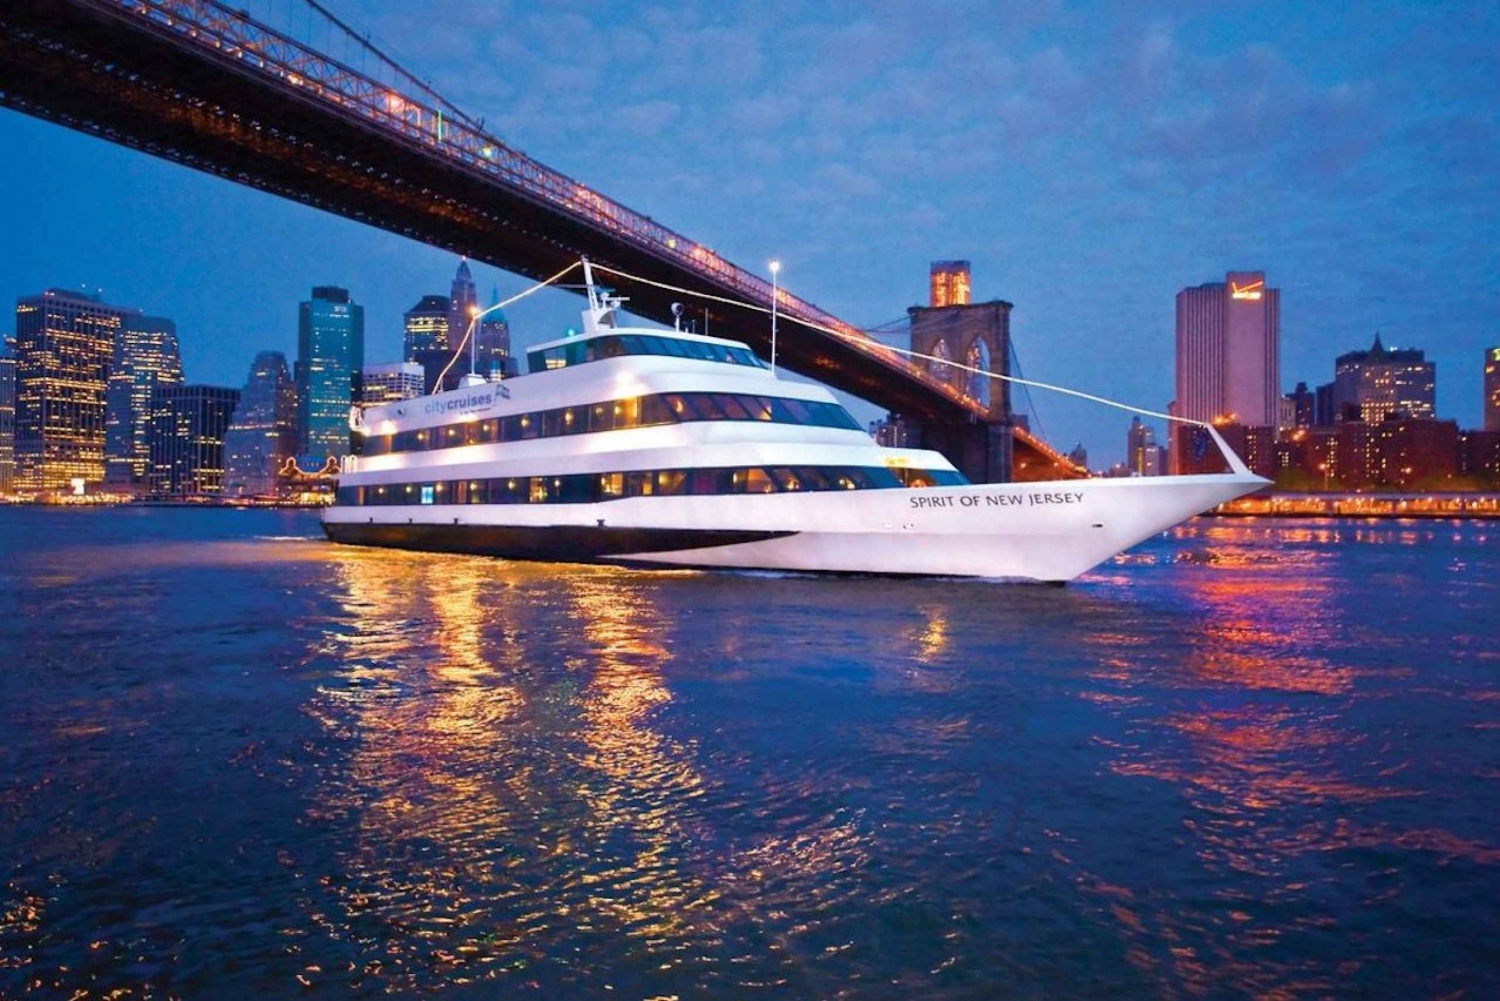 From New Jersey: NYC New Year's Eve Fireworks Dinner Cruise